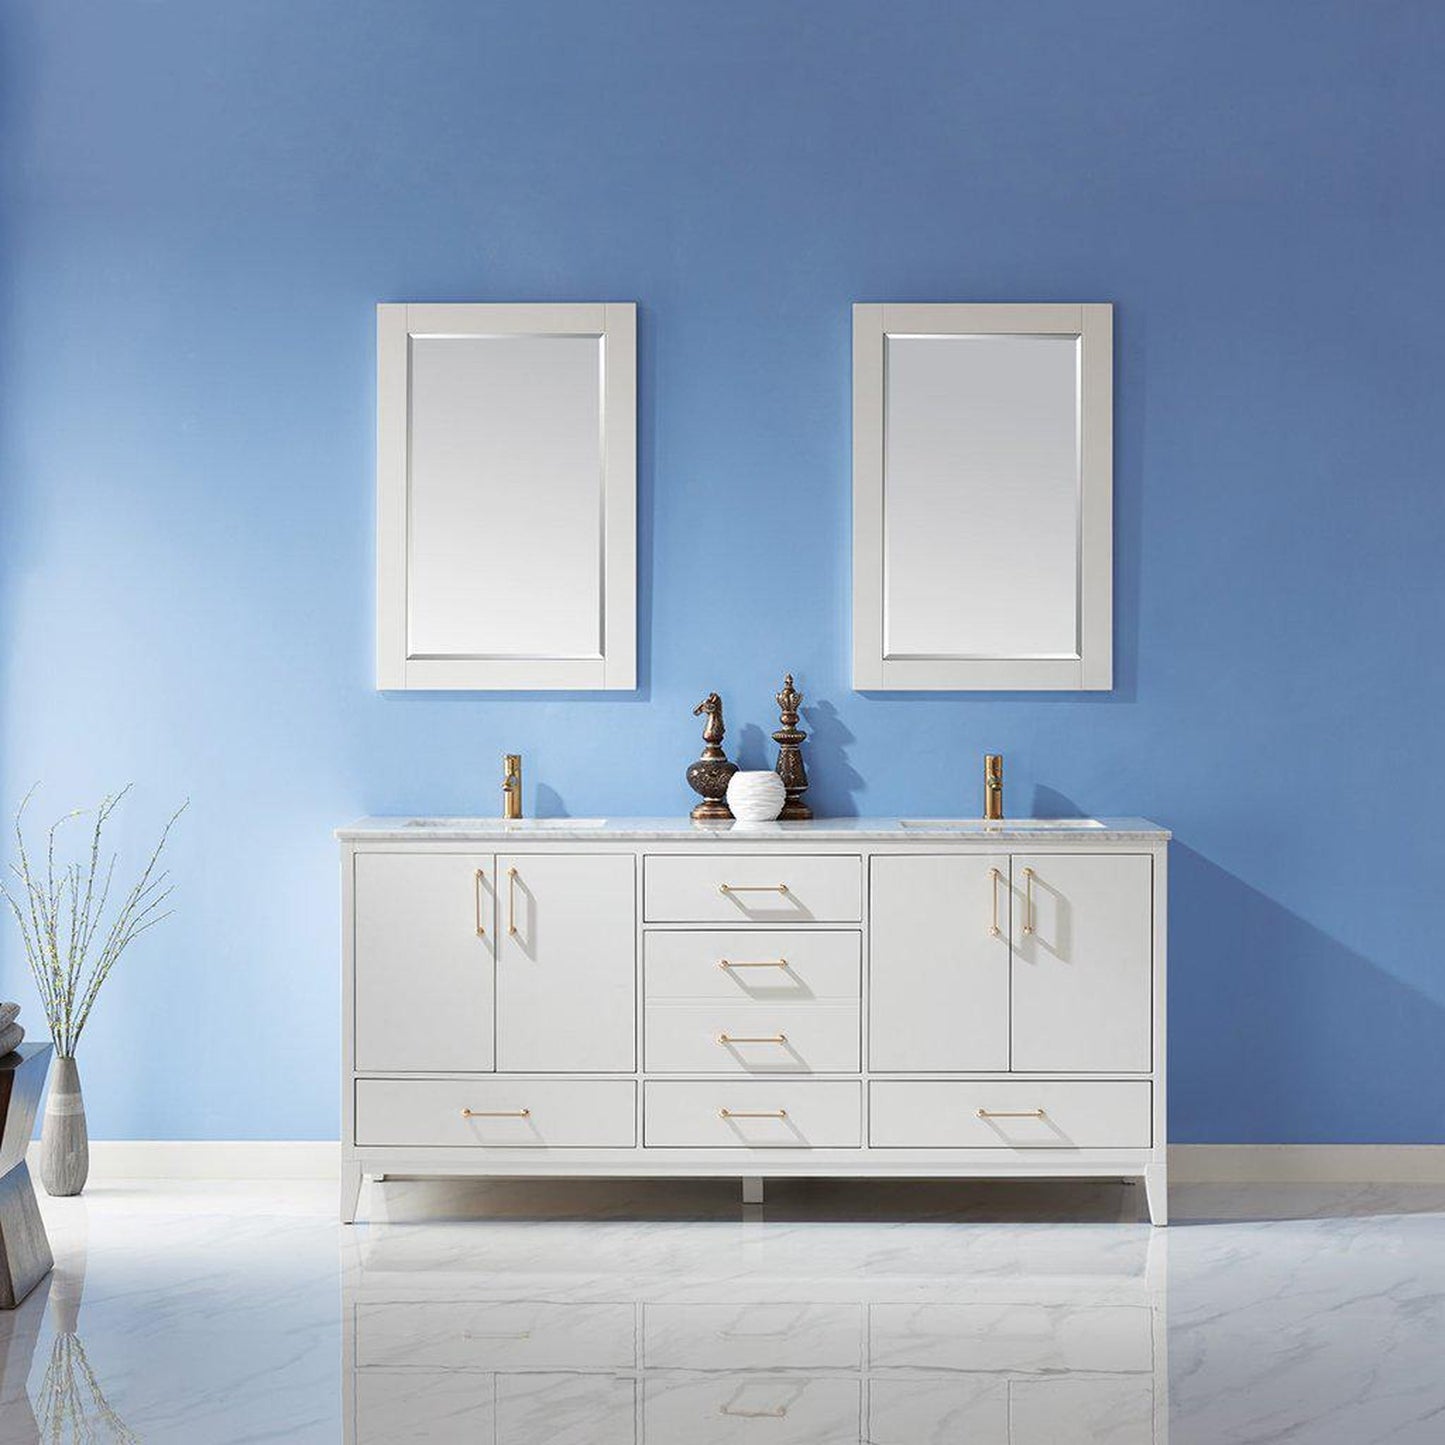 Altair Sutton 72" Double White Freestanding Bathroom Vanity Set With Mirror, Natural Carrara White Marble Two Rectangular Undermount Ceramic Sinks, and Overflow